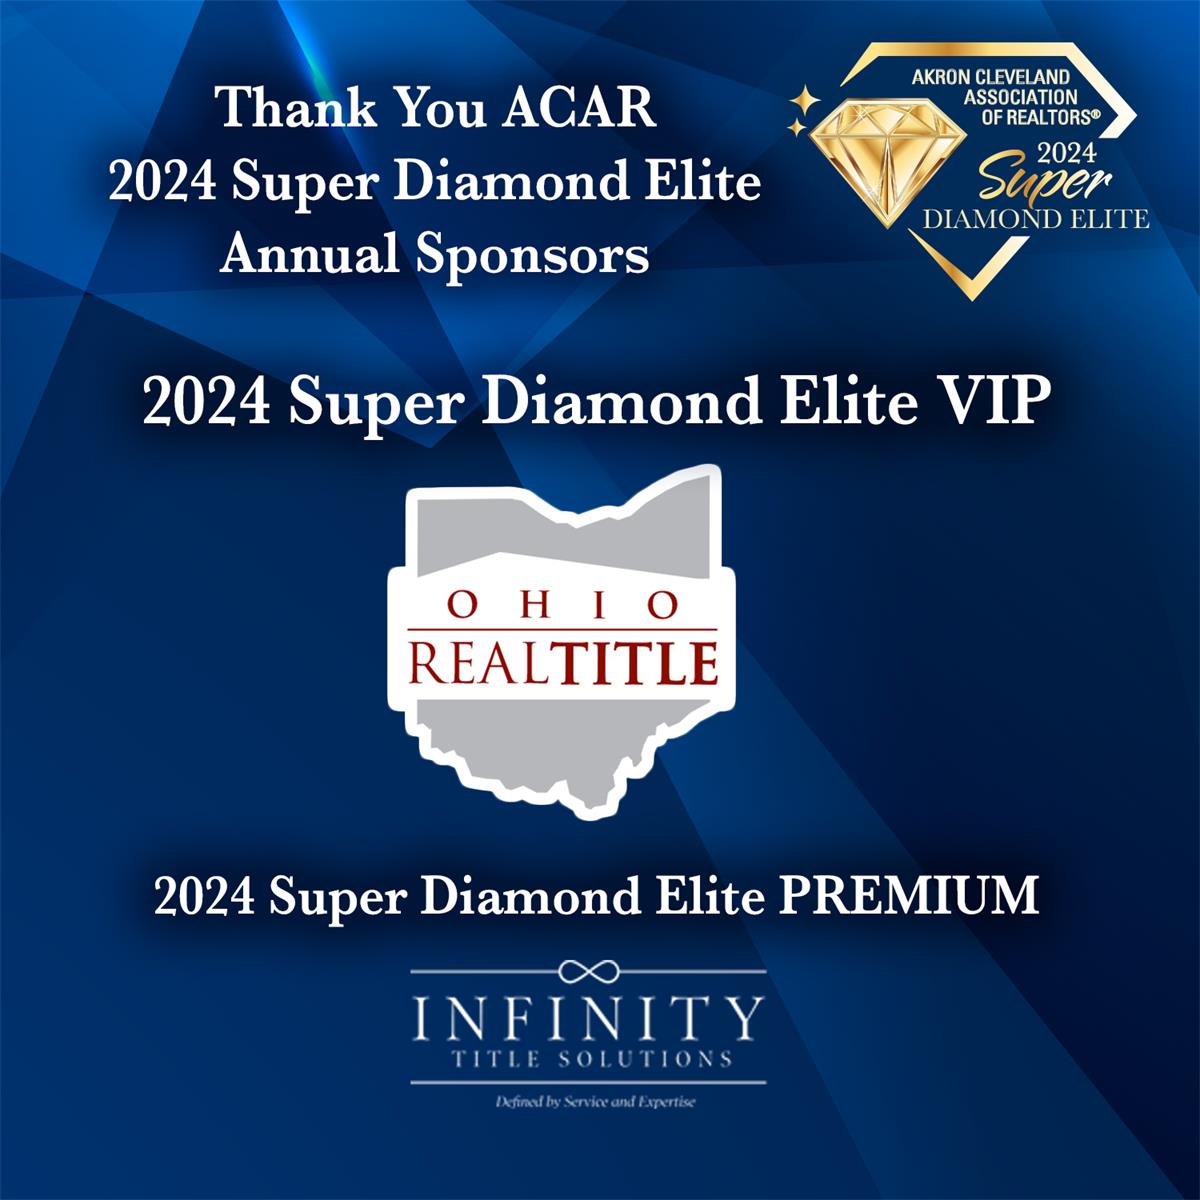 Featured image for “Welcome to 2024 Super Diamond Elite Sponsors”